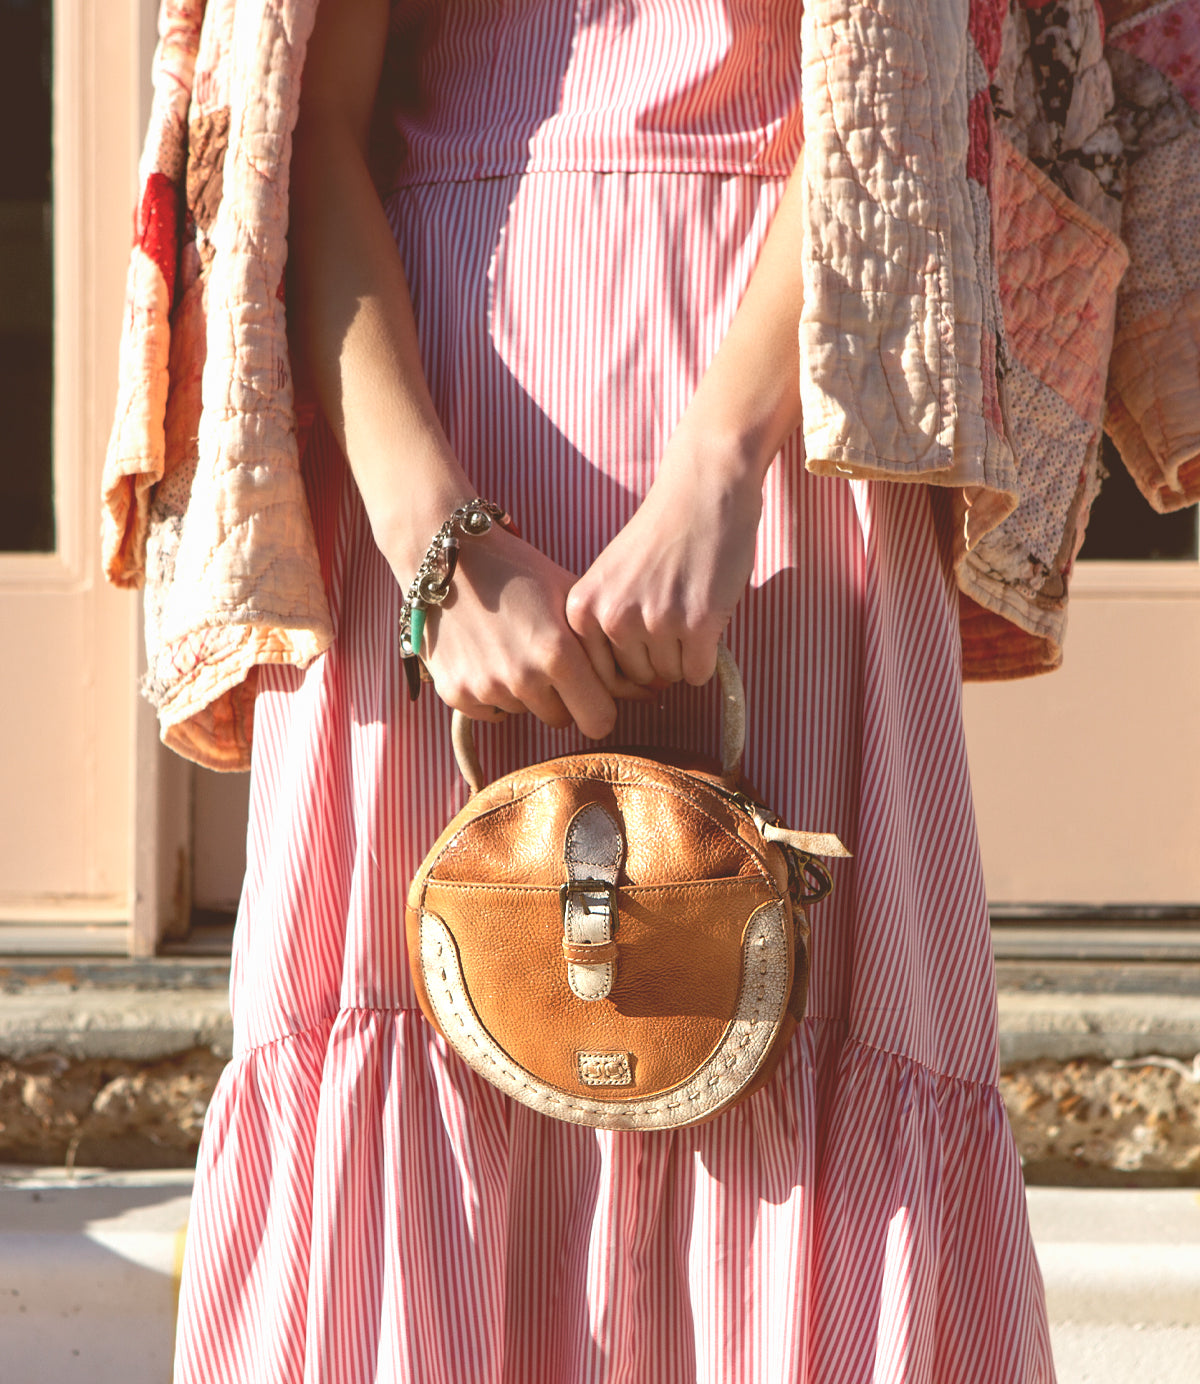 A woman in a pink dress holding a Bed Stu Arenfield bag.